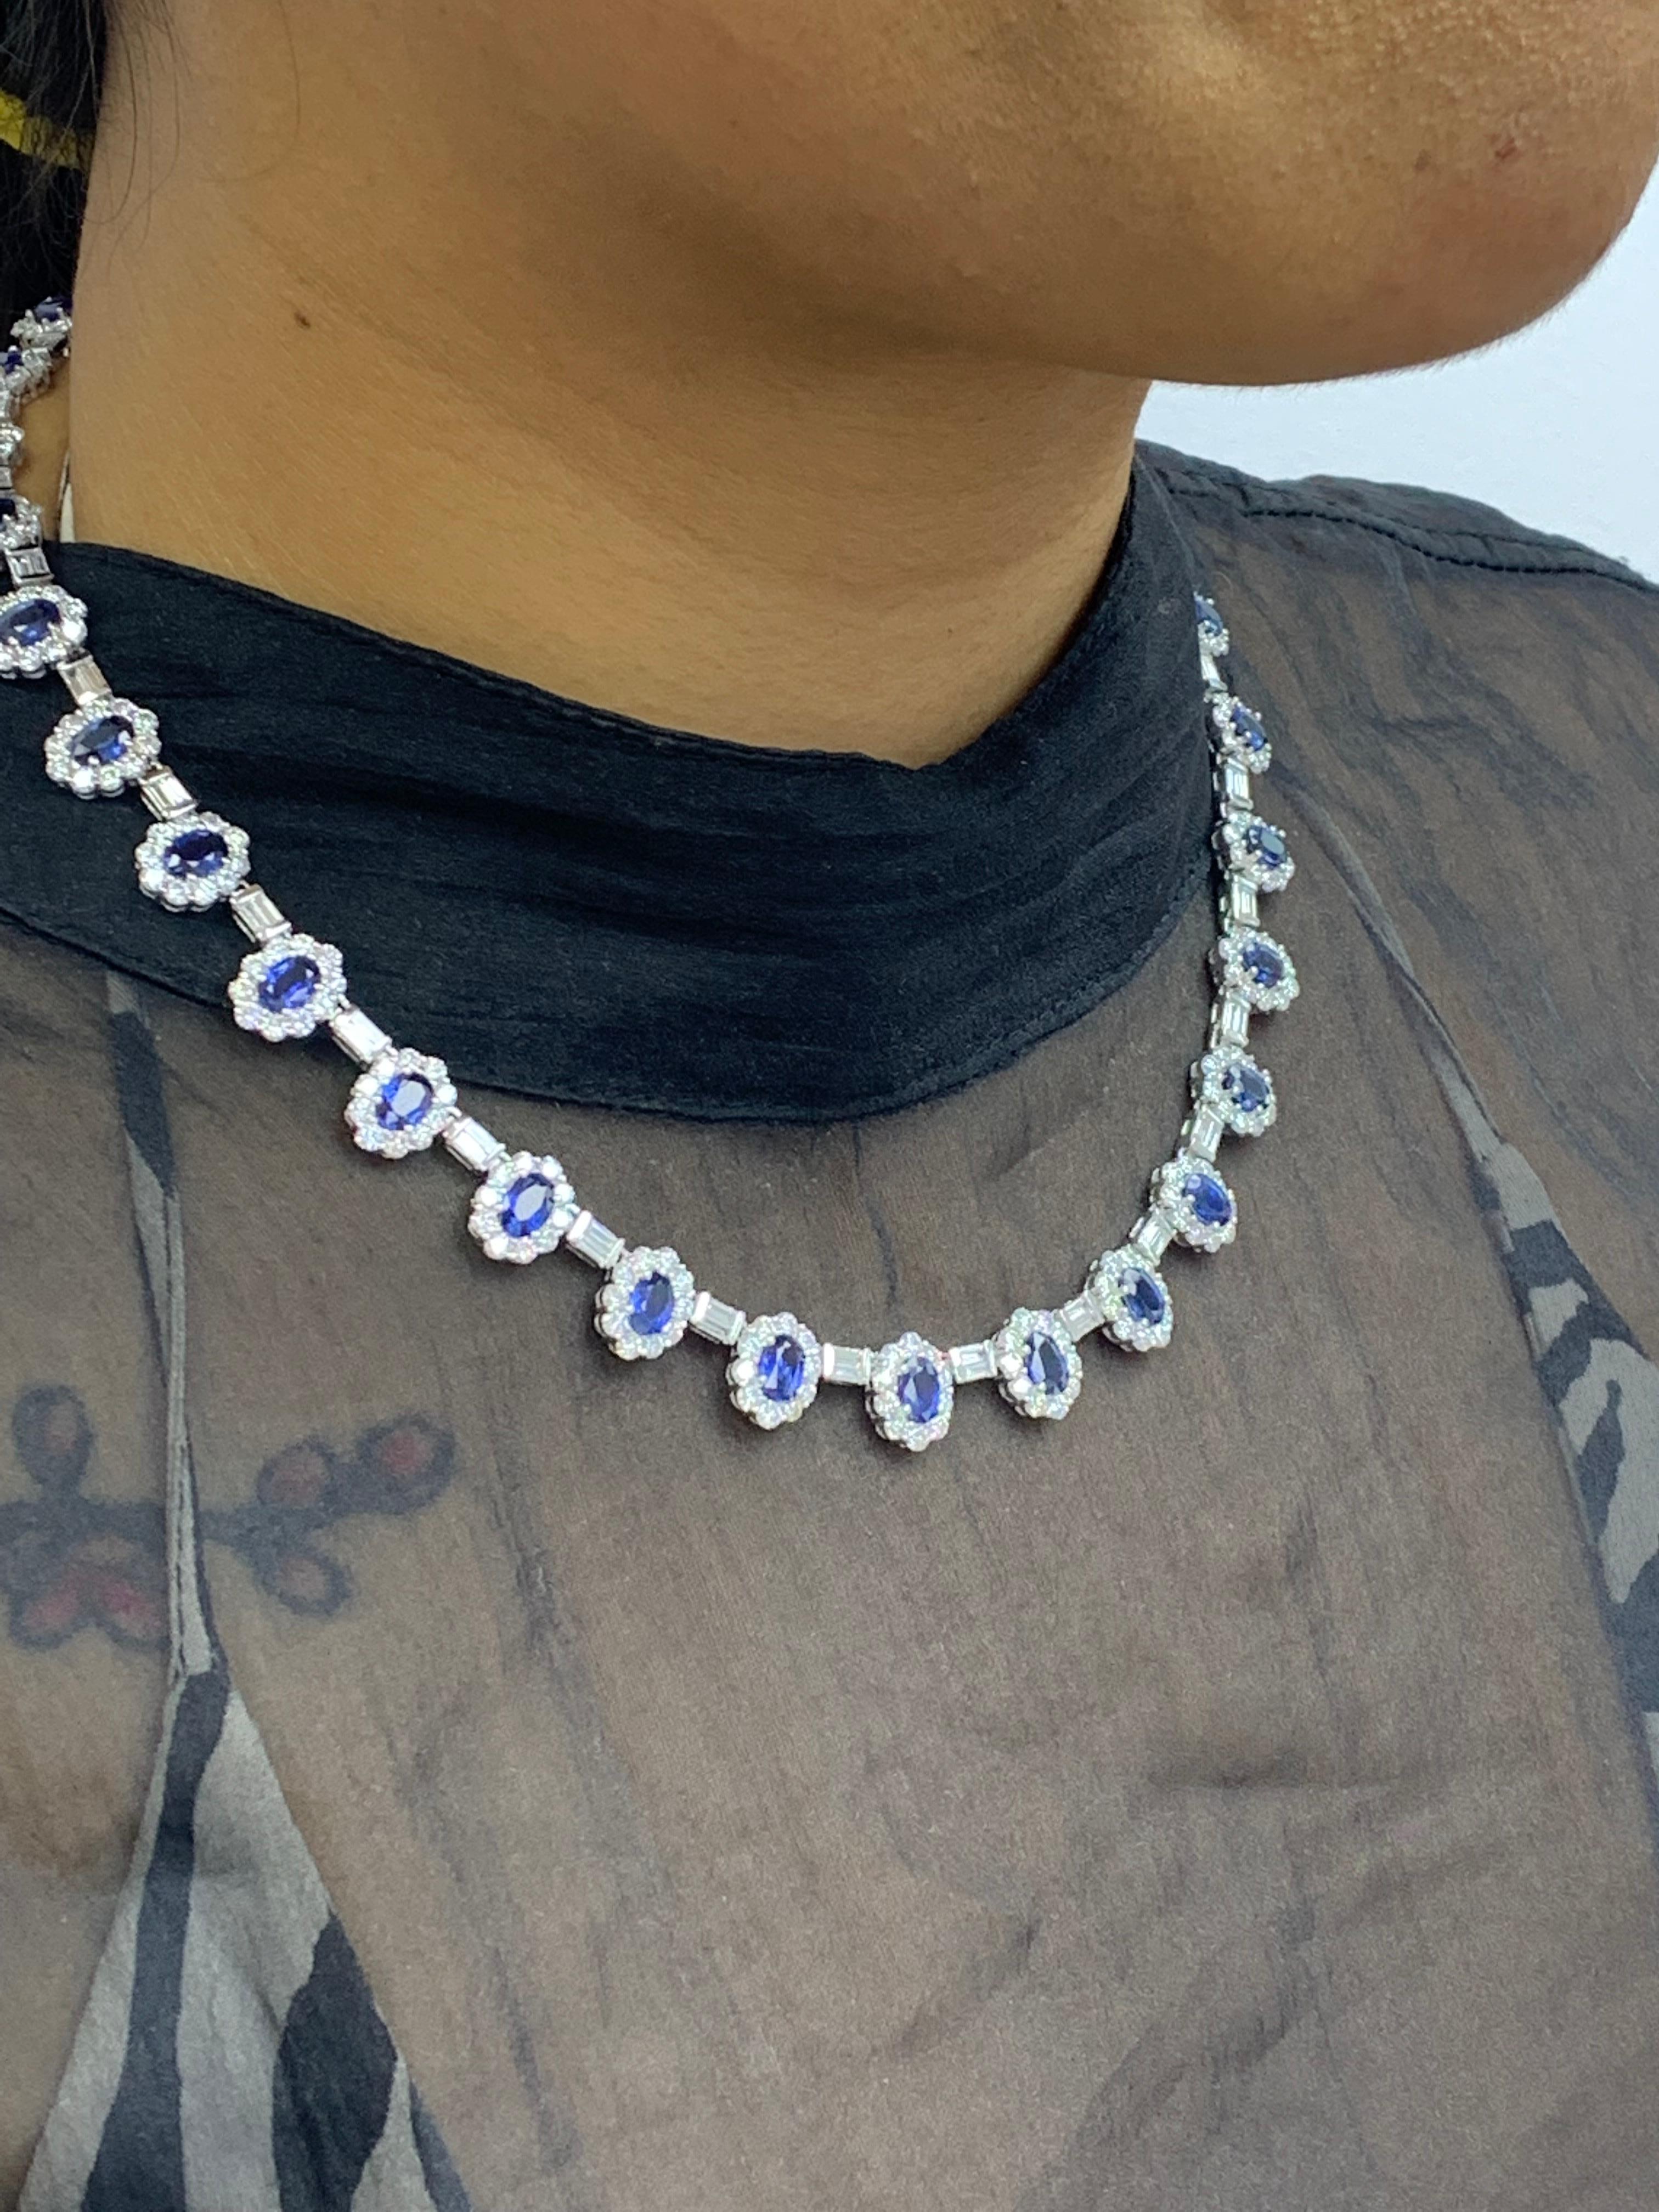 12.74 Carat Oval Cut Blue Sapphire and Diamond Necklace in 18K White Gold For Sale 5